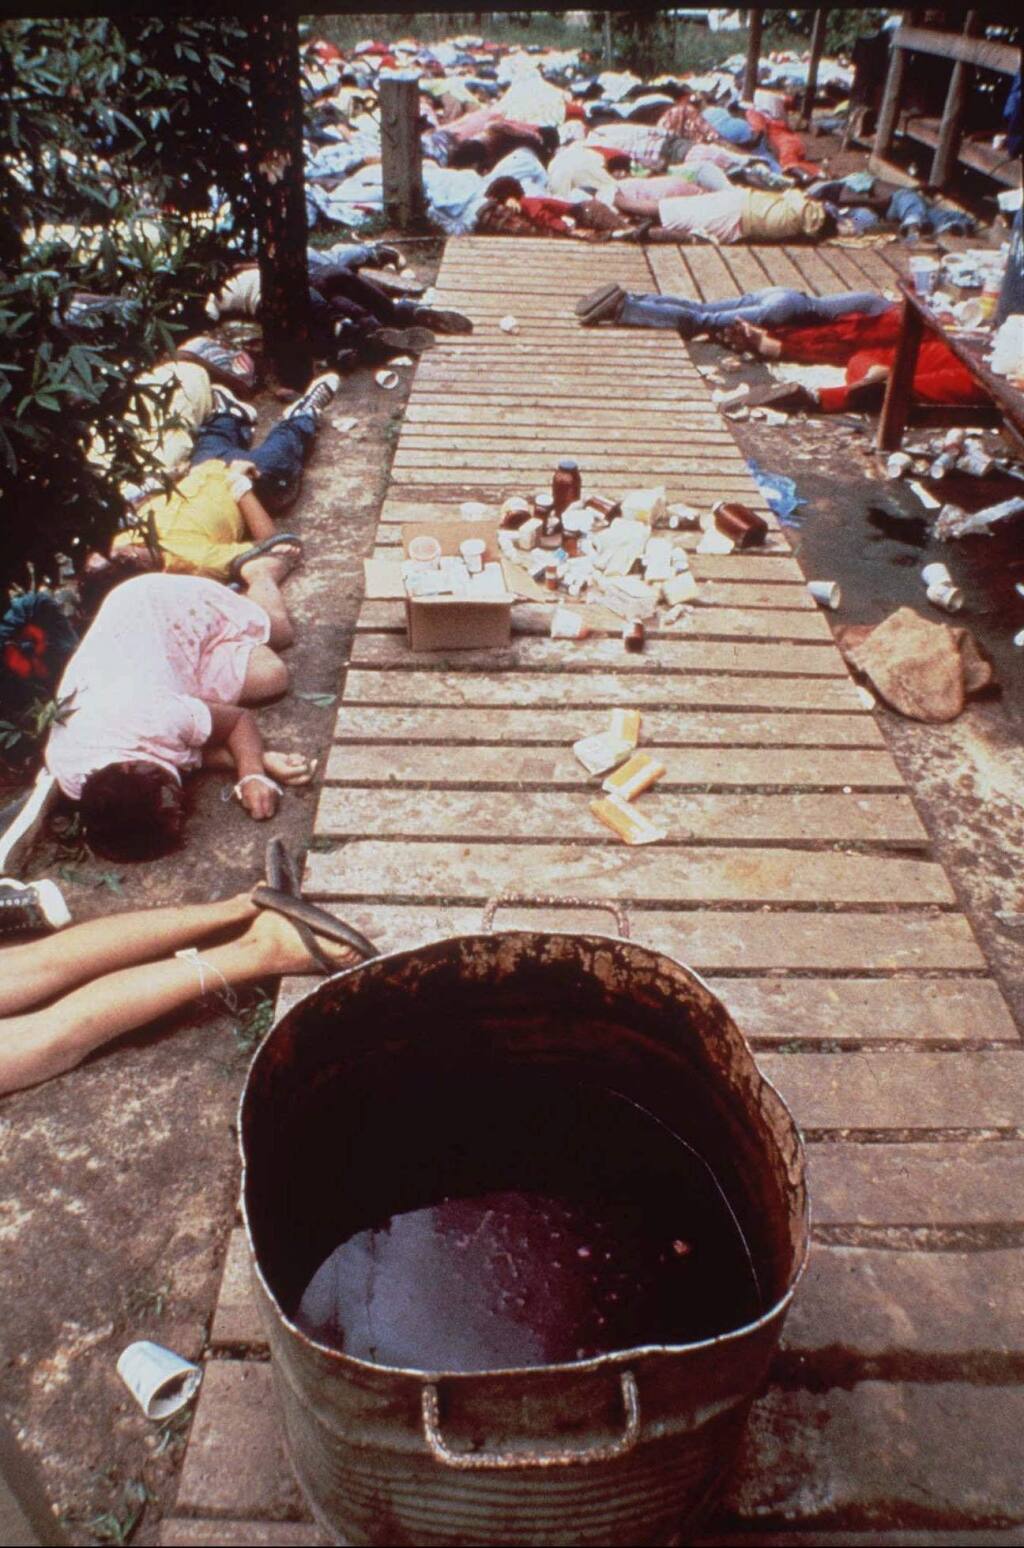 FILE - In this Nov. 20, 1978 file photo, a vat that contained a drink laced with deadly cyanide sits on a sidewalk at Peoples Temple in Jonestown, Guyana. The bodies of followers that drank the poison are strewn around the commune. Dozens of Peoples Temple members in Guyana survived the mass suicides and murders of more than 900 because they had slipped out of Jonestown or happened to be away Nov. 18, 1978. Those raised in the temple or who joined as teens lost the only life they knew. They have journeyed over the past 40 years through grief over lost loved ones, feeling like pariahs, building new lives and, finally, acknowledging that many had a role in enabling the Rev. Jim Jones to seize control over his followers. (AP Photo/Frank Johnston, Pool, File)